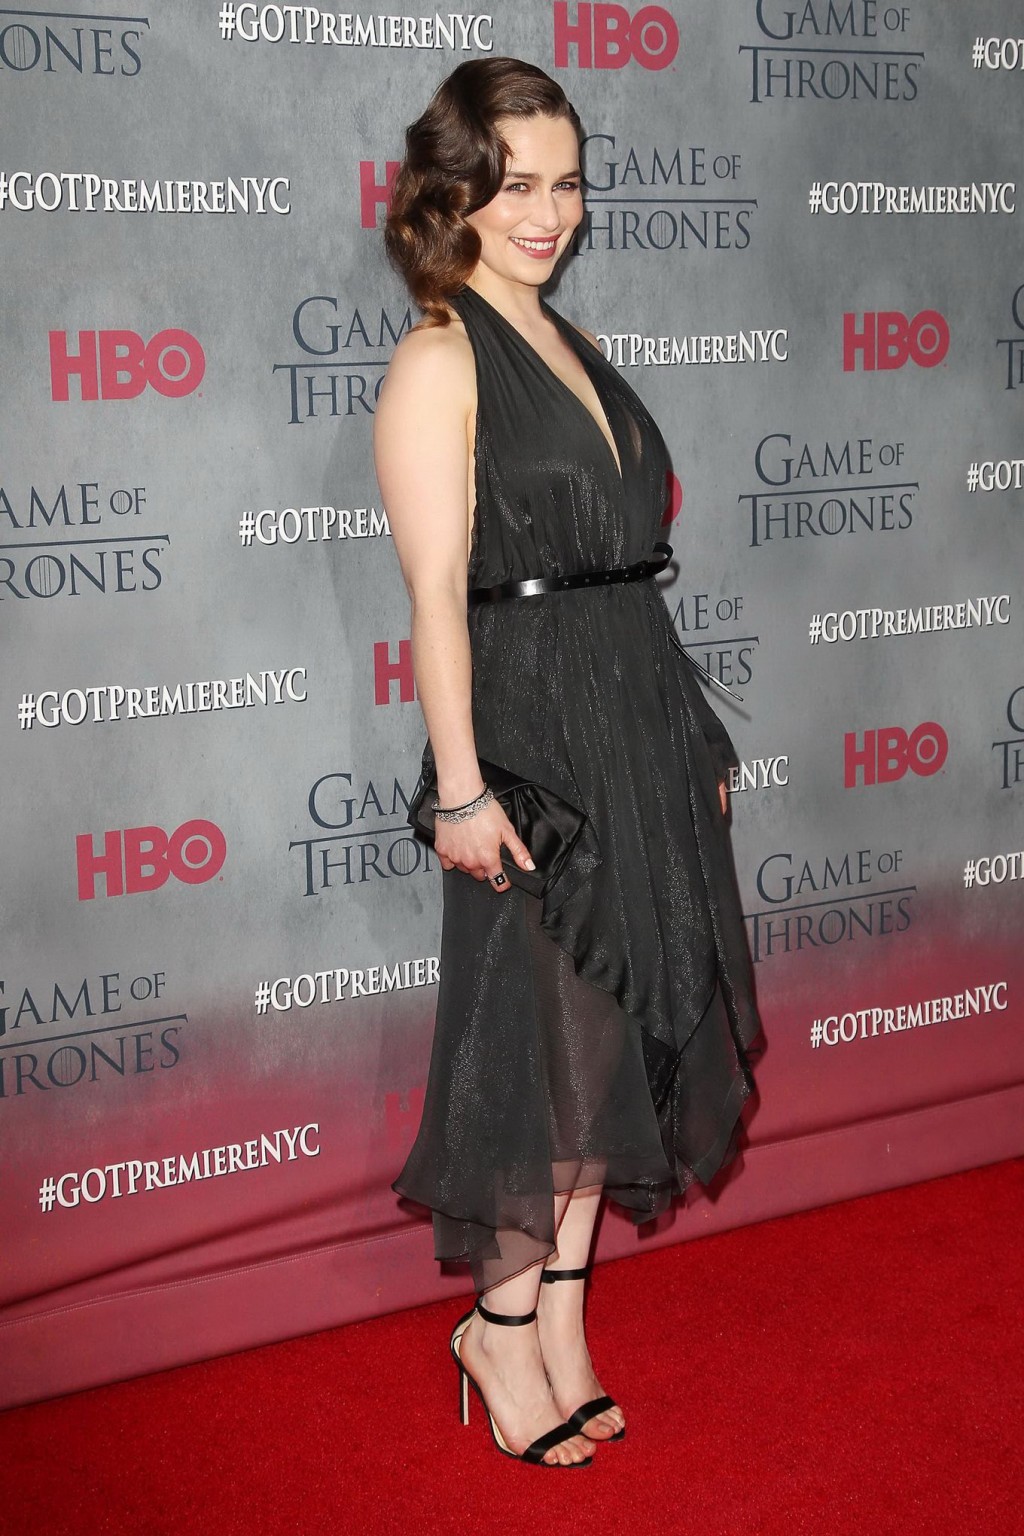 Emilia Clarke braless wearing black partially see-through dress at the Game of T #75201521